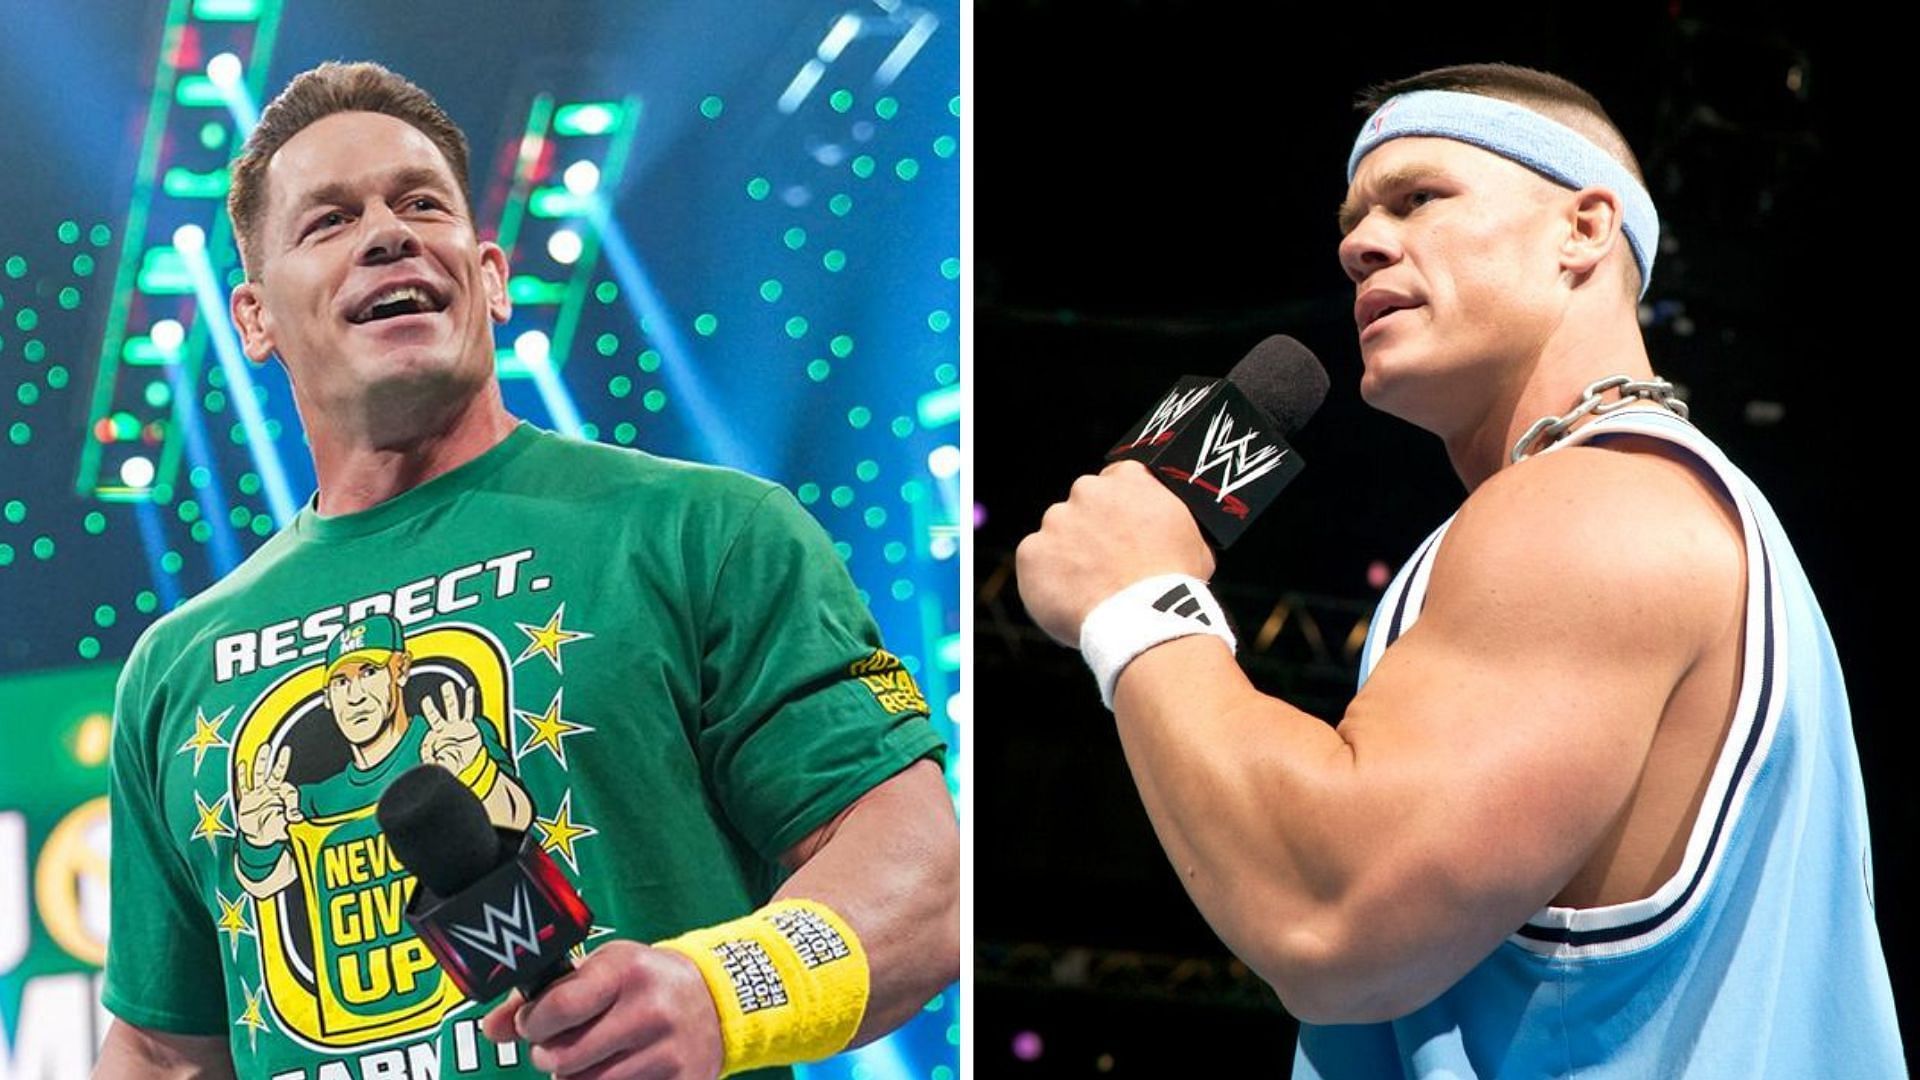 John Cena recently returned on WWE RAW to celebrate 20 years with the company